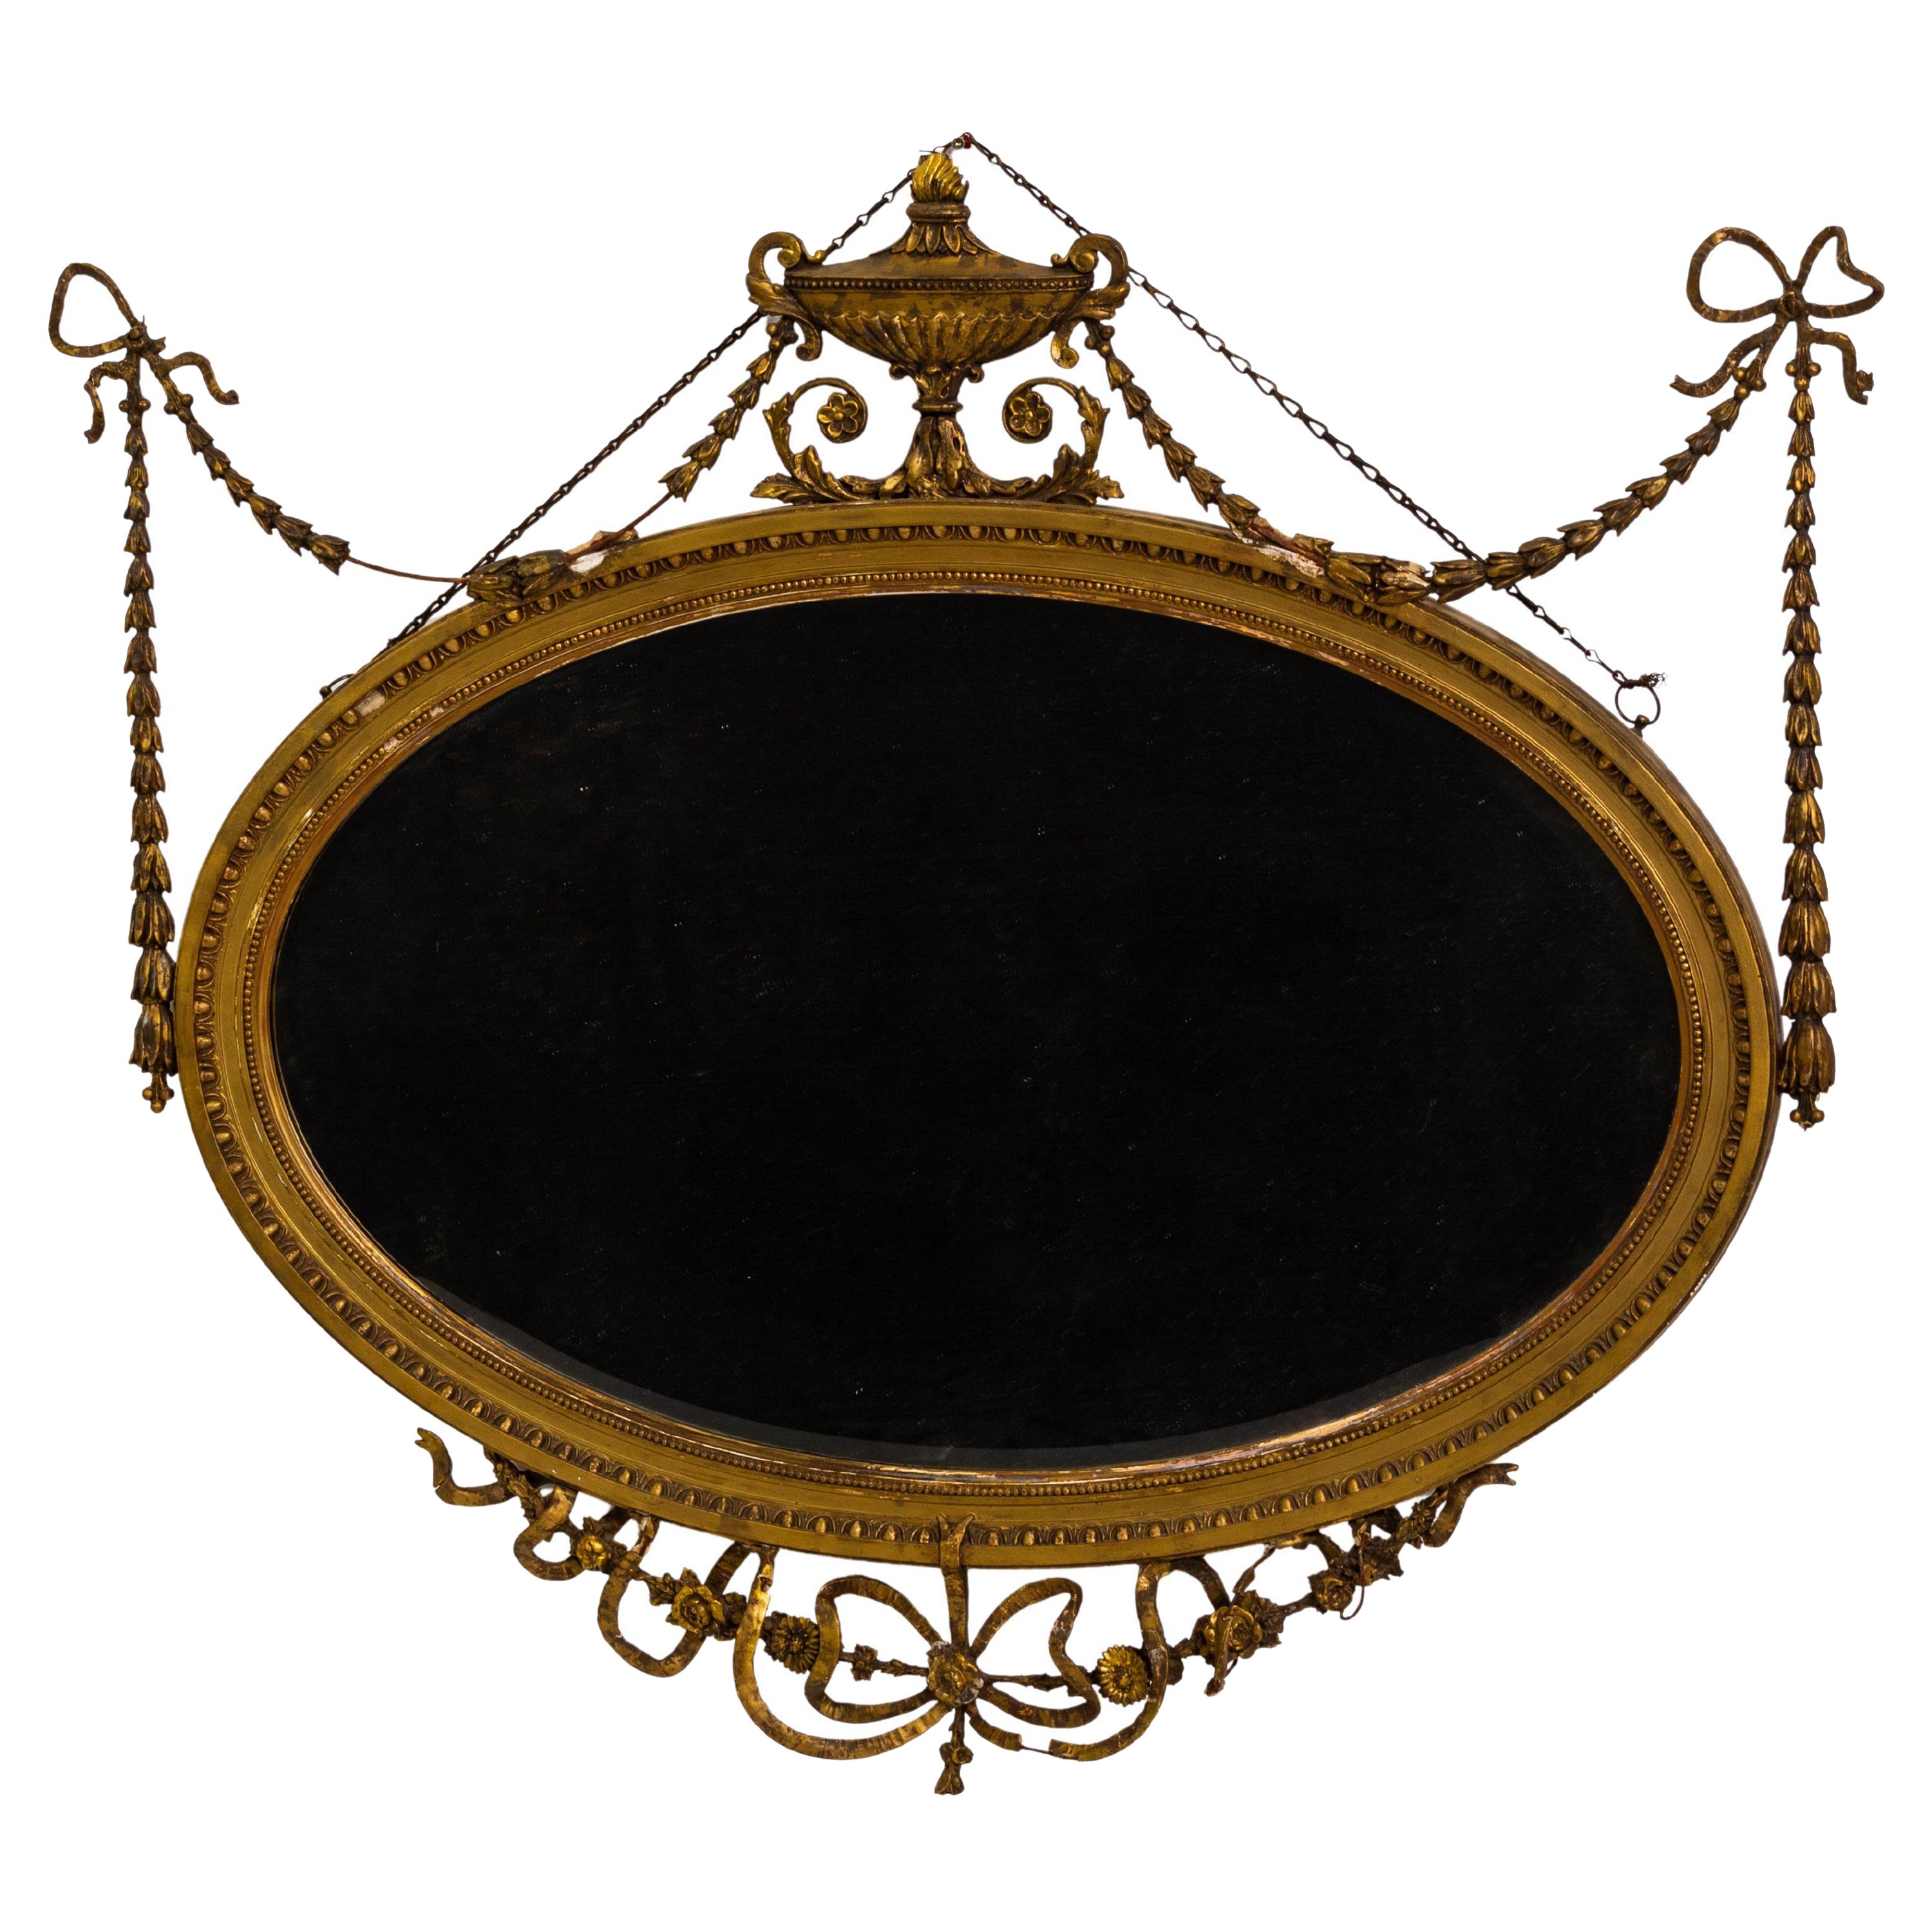 Victorian English Oval Giltwood Neoclassical Adams Style Mirror 19th Century  For Sale